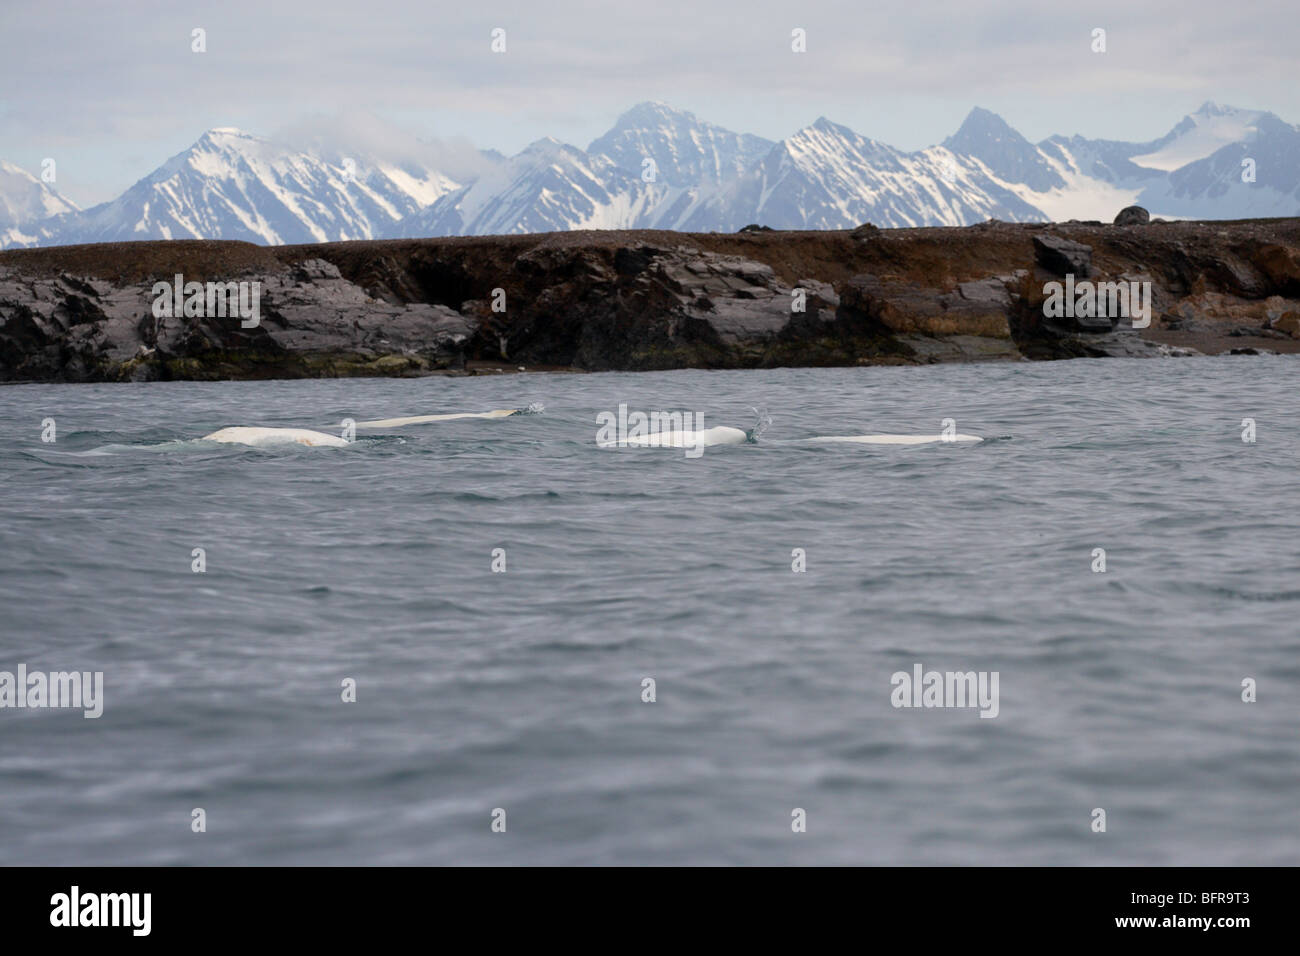 Flock of beluga surfacing in the arctic sea of Svalbard with snow capped mountain peaks in the background Stock Photo